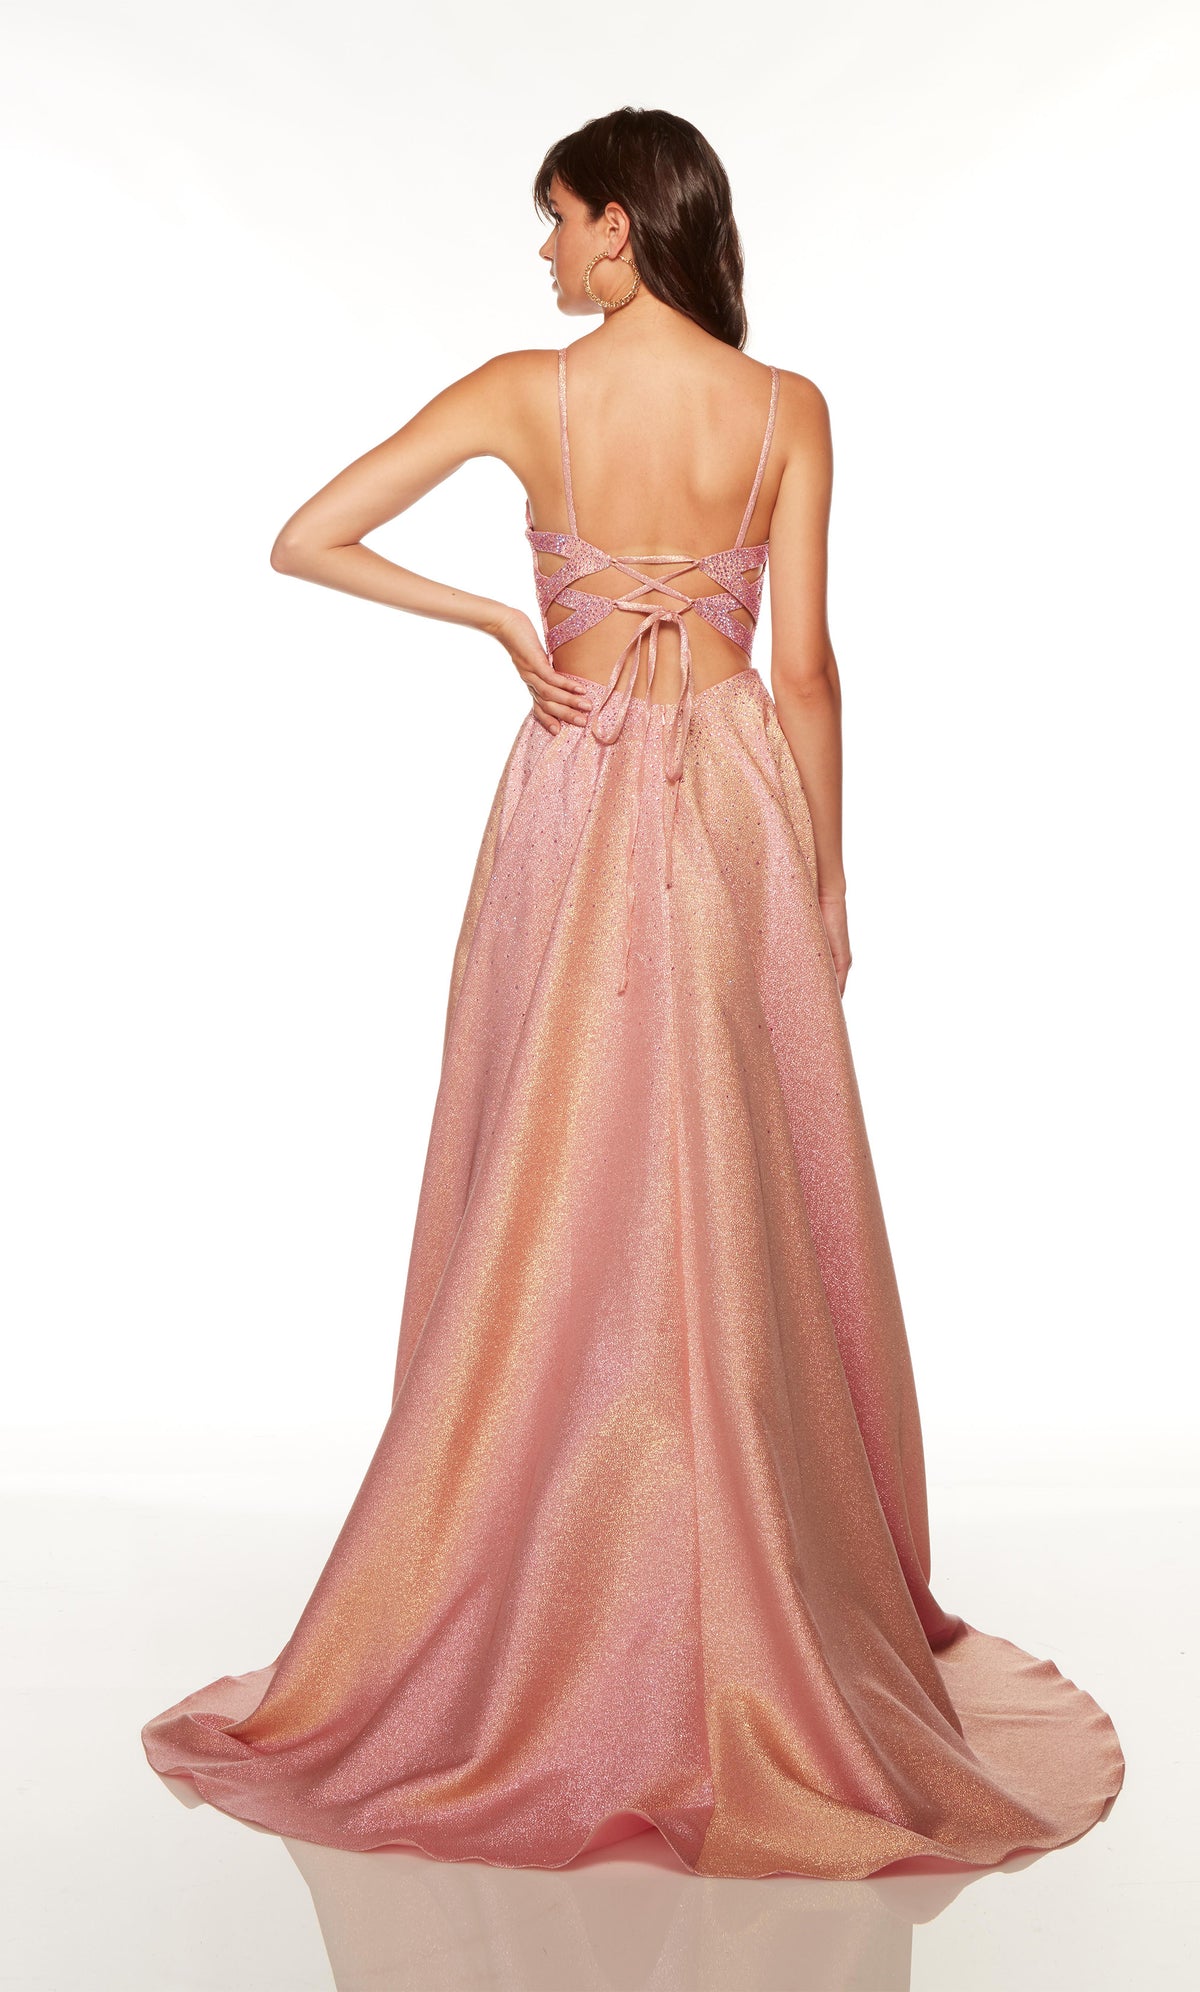 Pink-gold iridescent prom dress with a lace up back and train.